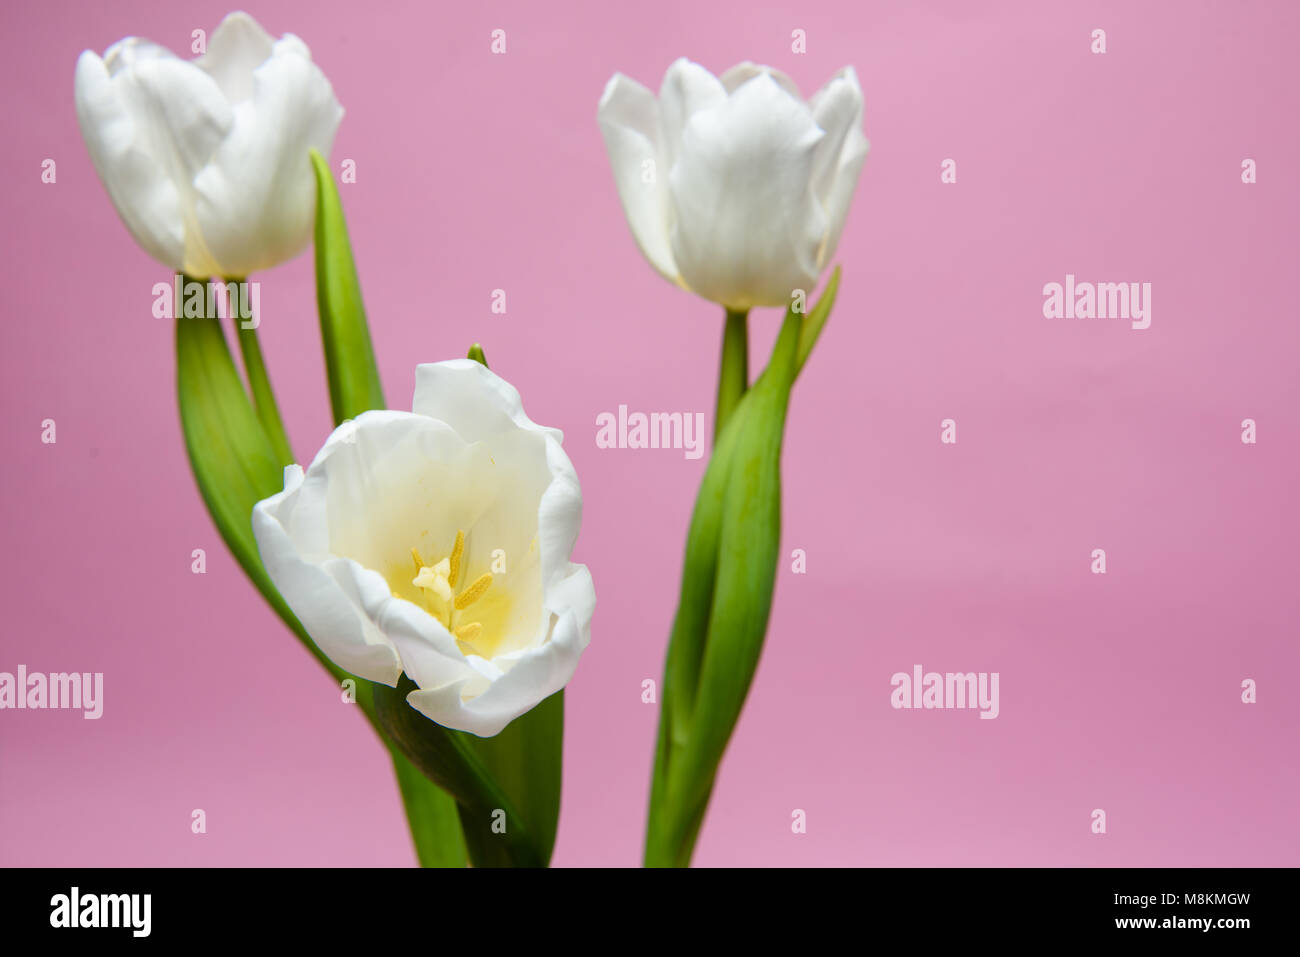 Three white tulips on a pink background. Horizontal photo with free space for text. Stock Photo